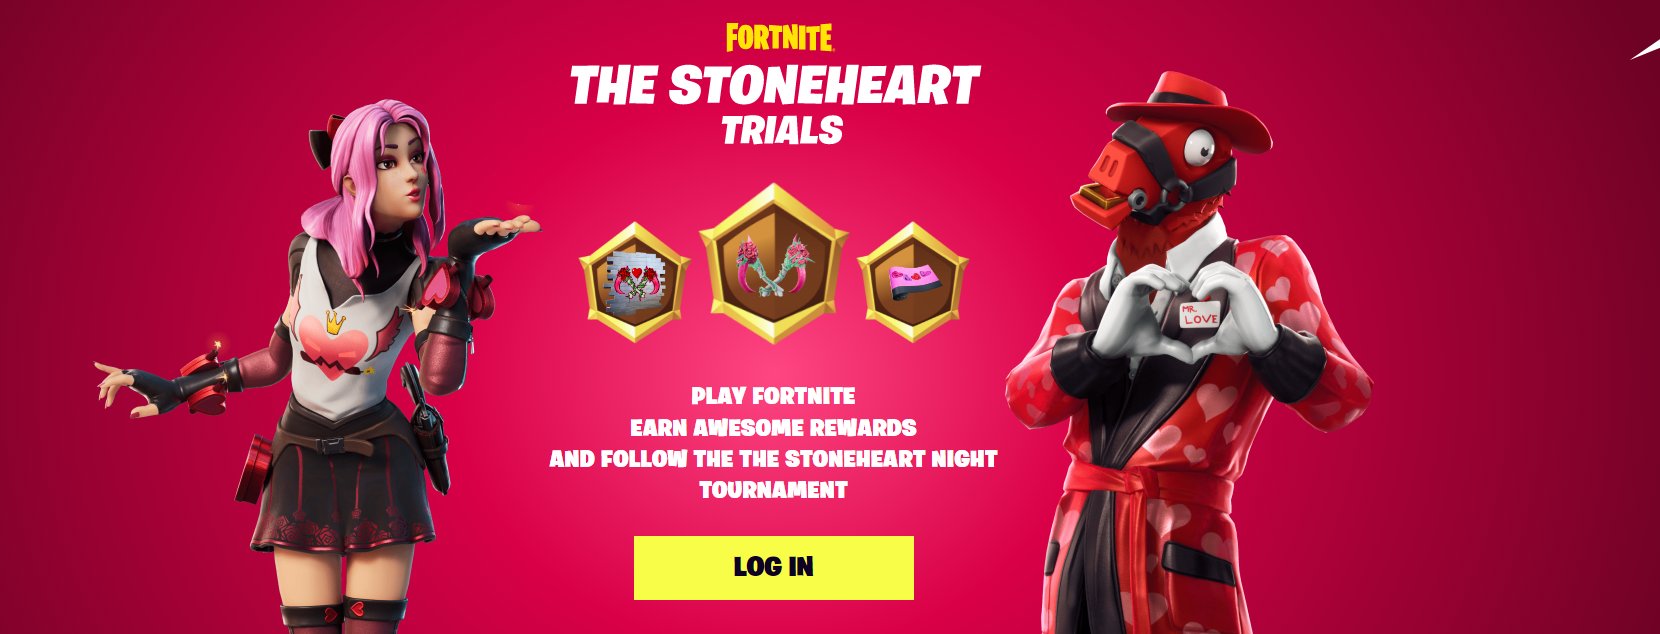 Fortnite Thorns of Passion Pickaxe And Hearty Wrap for Free - The Stoneheart Trials 